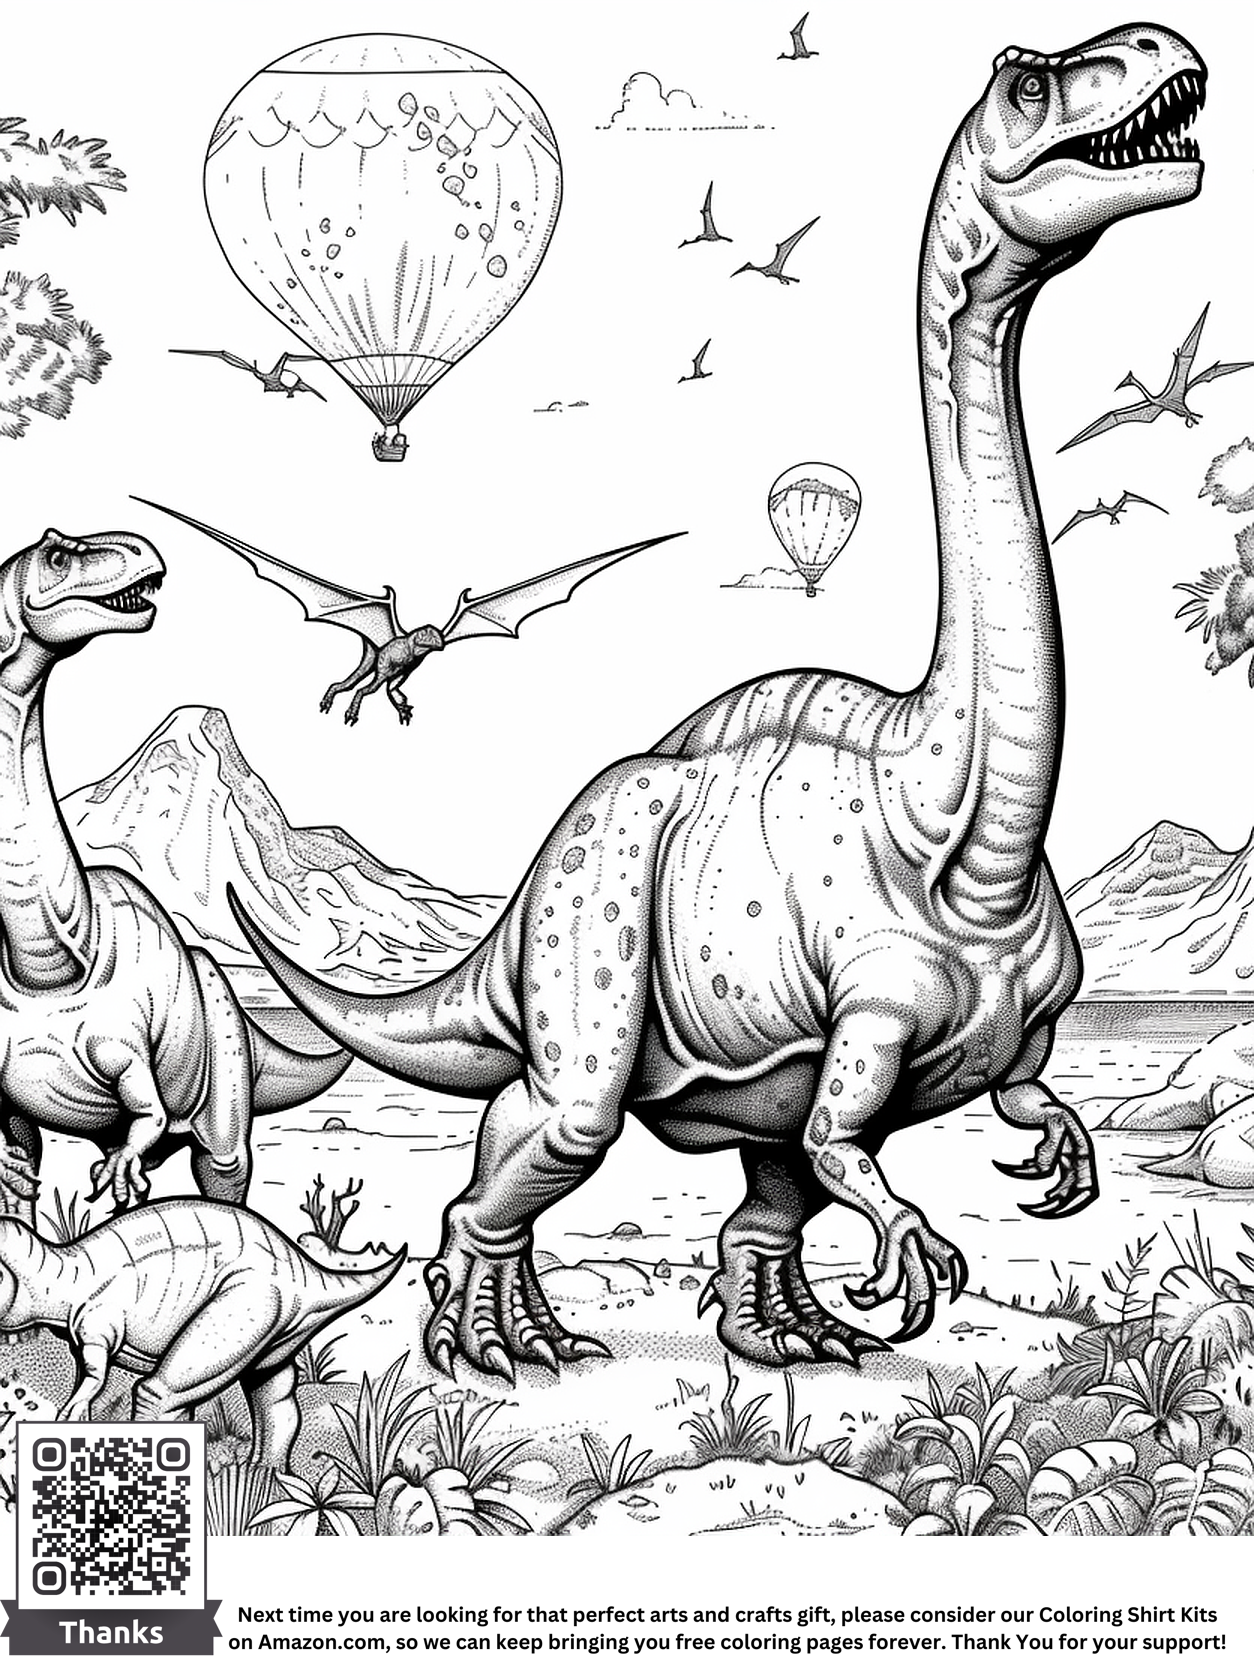 "2000+ FREE Printable Dinosaur Coloring Pages – Black and White Fill